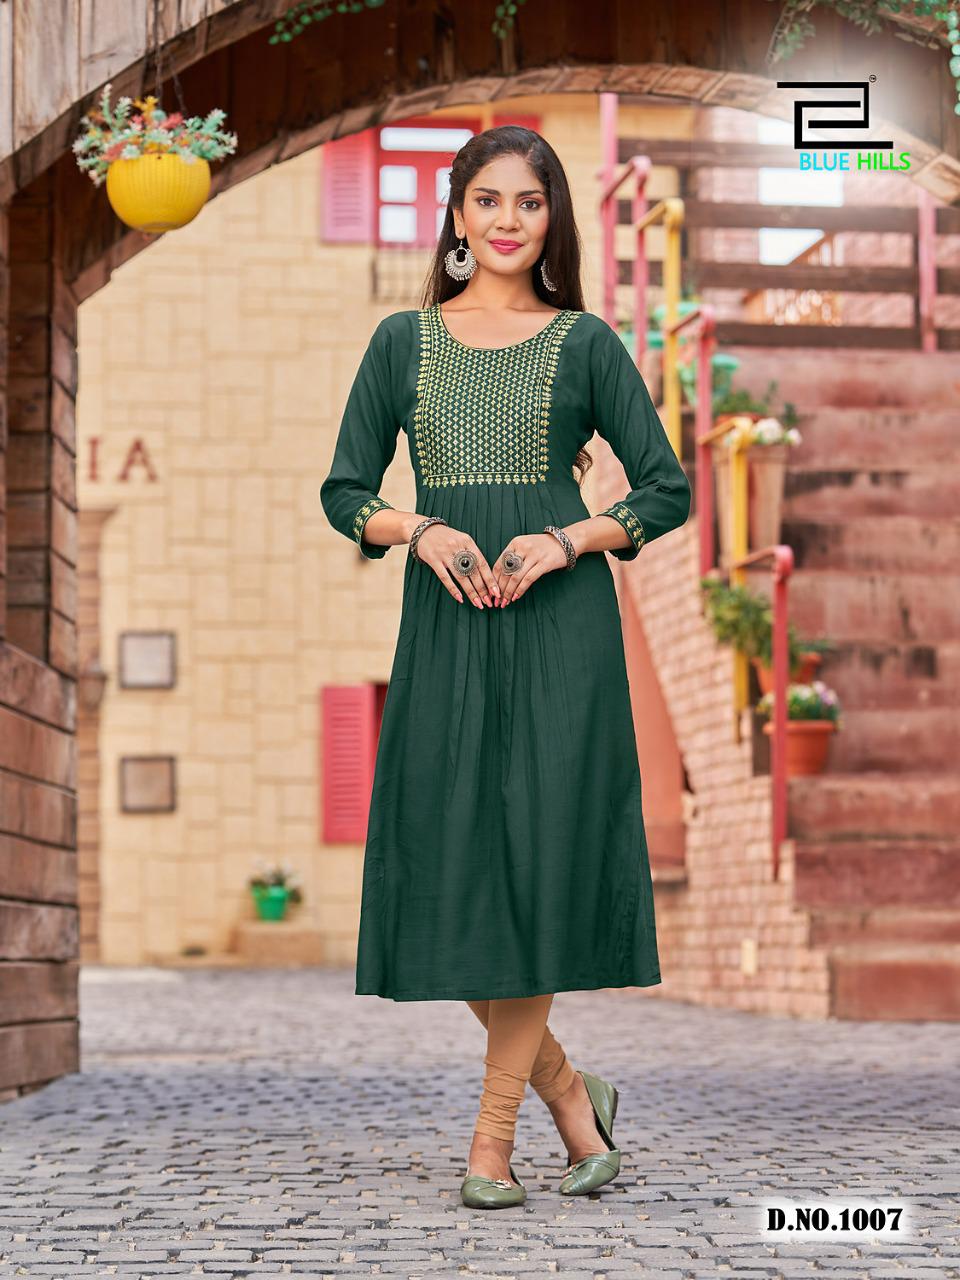 blue hills classic vol 15 rayon new and modern style kutri catalog